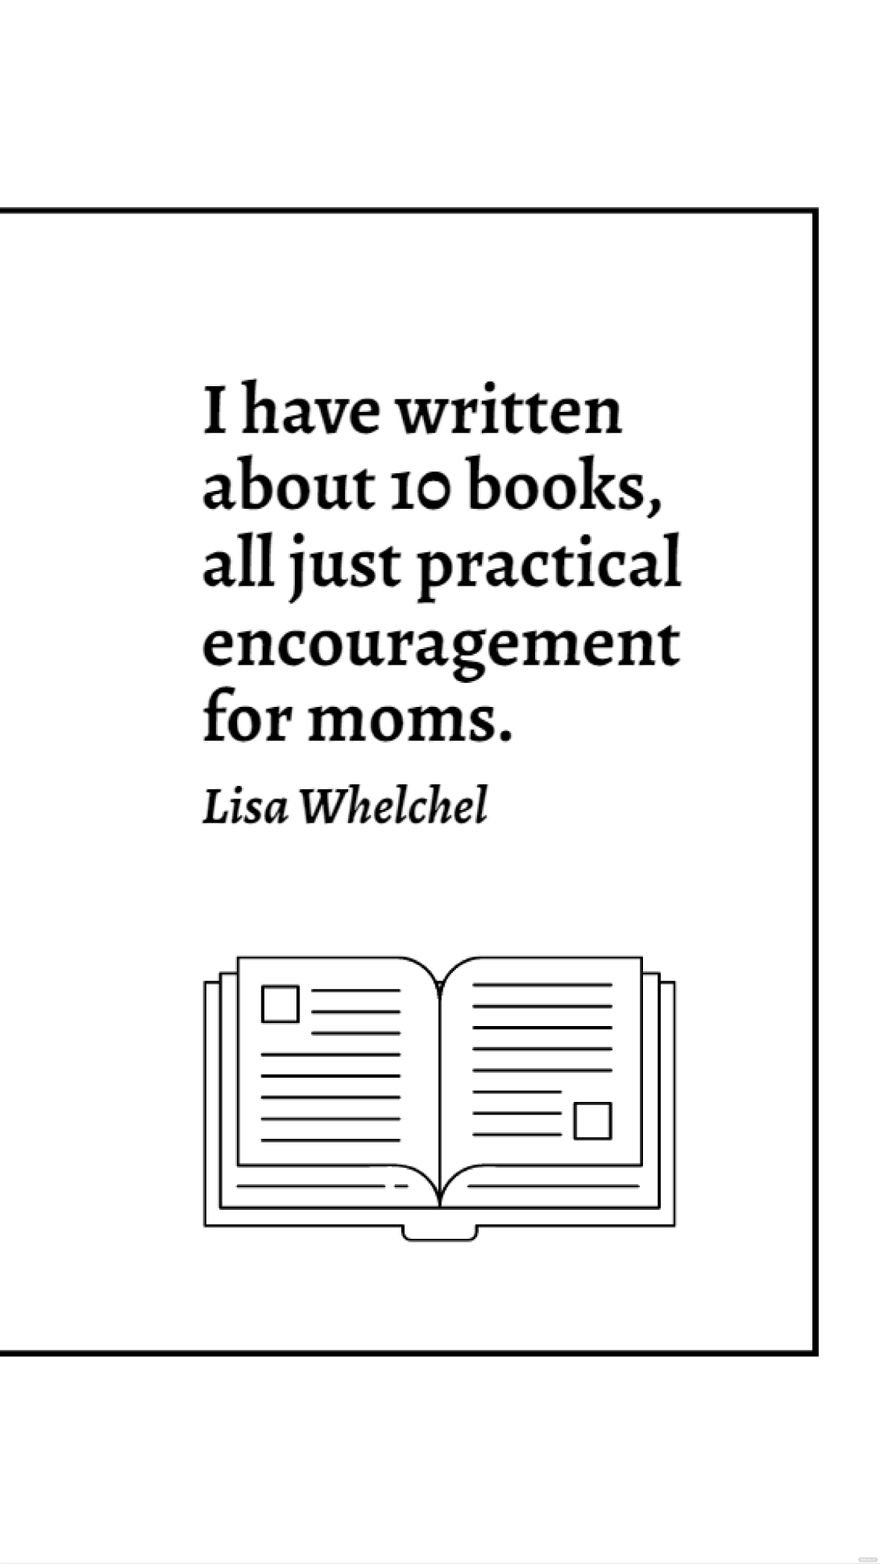 Lisa Whelchel - I have written about 10 books, all just practical encouragement for moms. Template